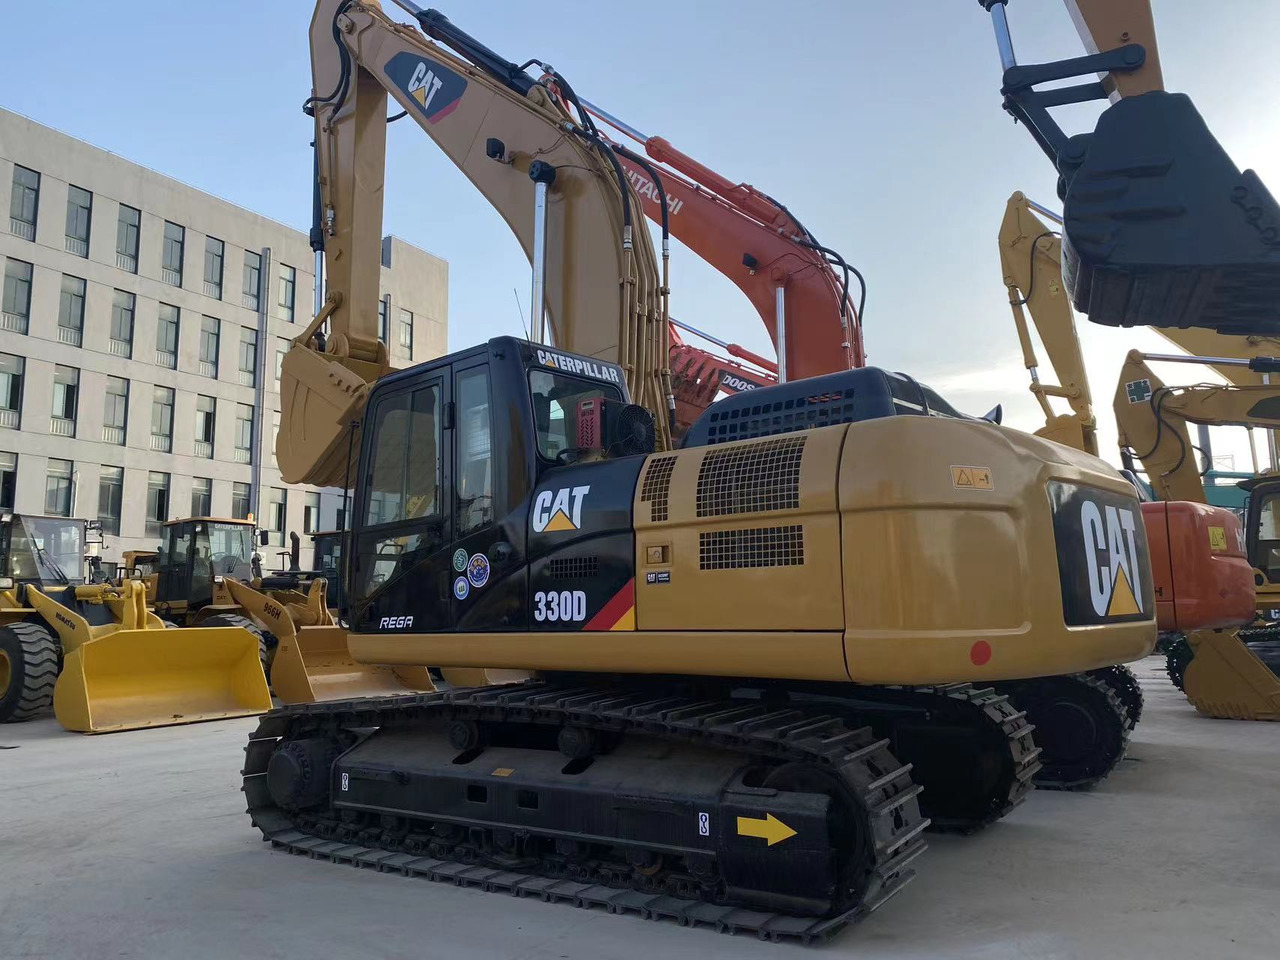 Crawler excavator 2021 Original made Japan used excavator Caterpillar 330D Large engineering construction machinery also for mining and agriculture welcome to inquire: picture 5